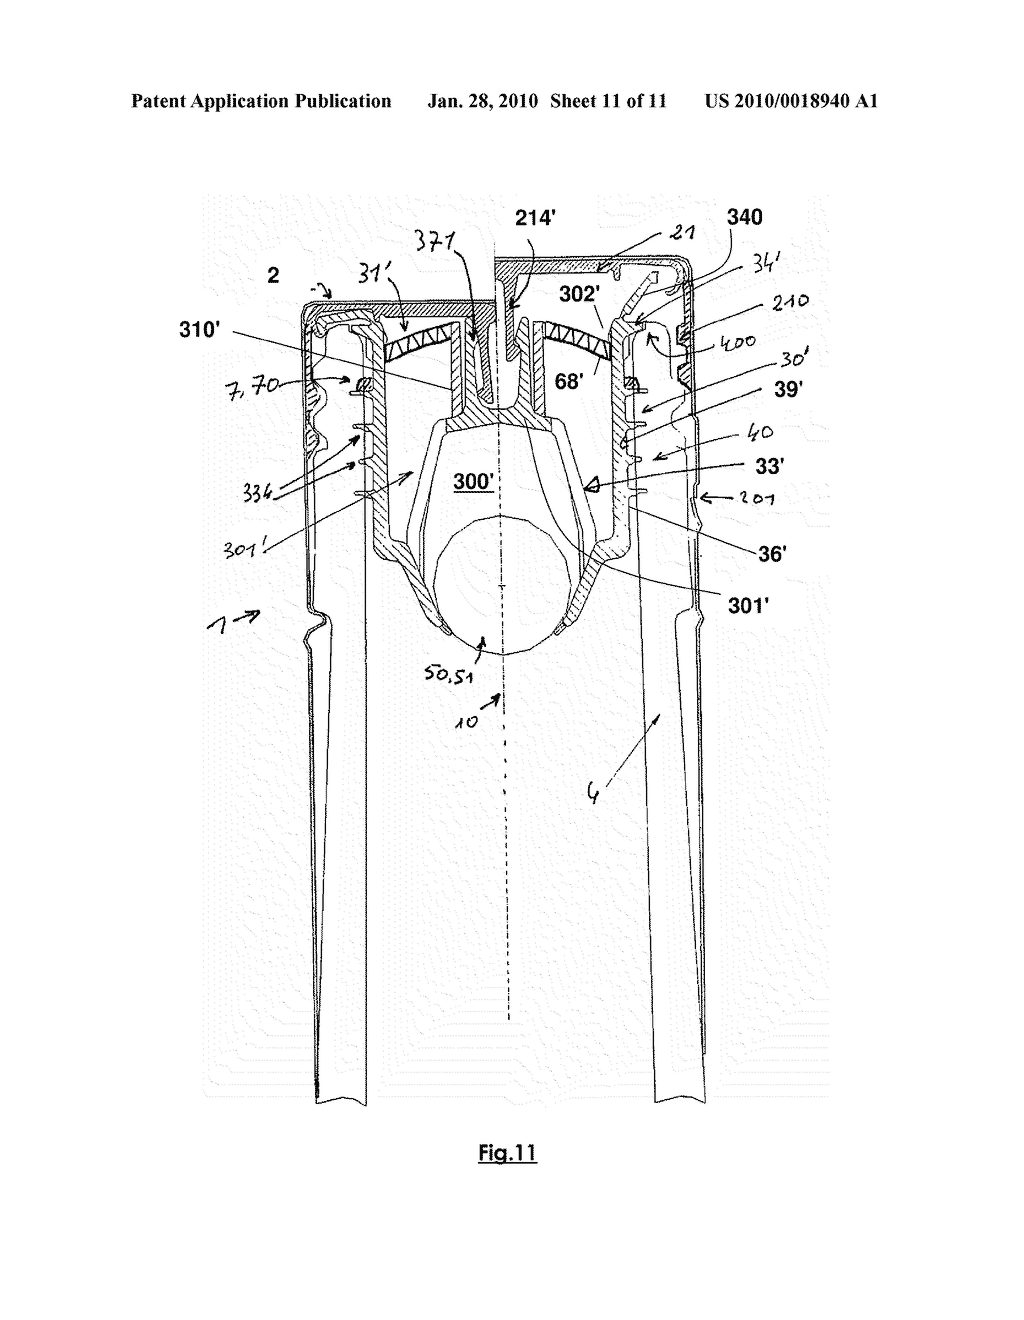 ANTI-REFILLLING DEVICE FOR THE NECK OF A CONTAINER, TYPICALLY A BOTTLE, AND A COMPOSITE STOPPER CAP INCLUDING SAID DEVICE - diagram, schematic, and image 12